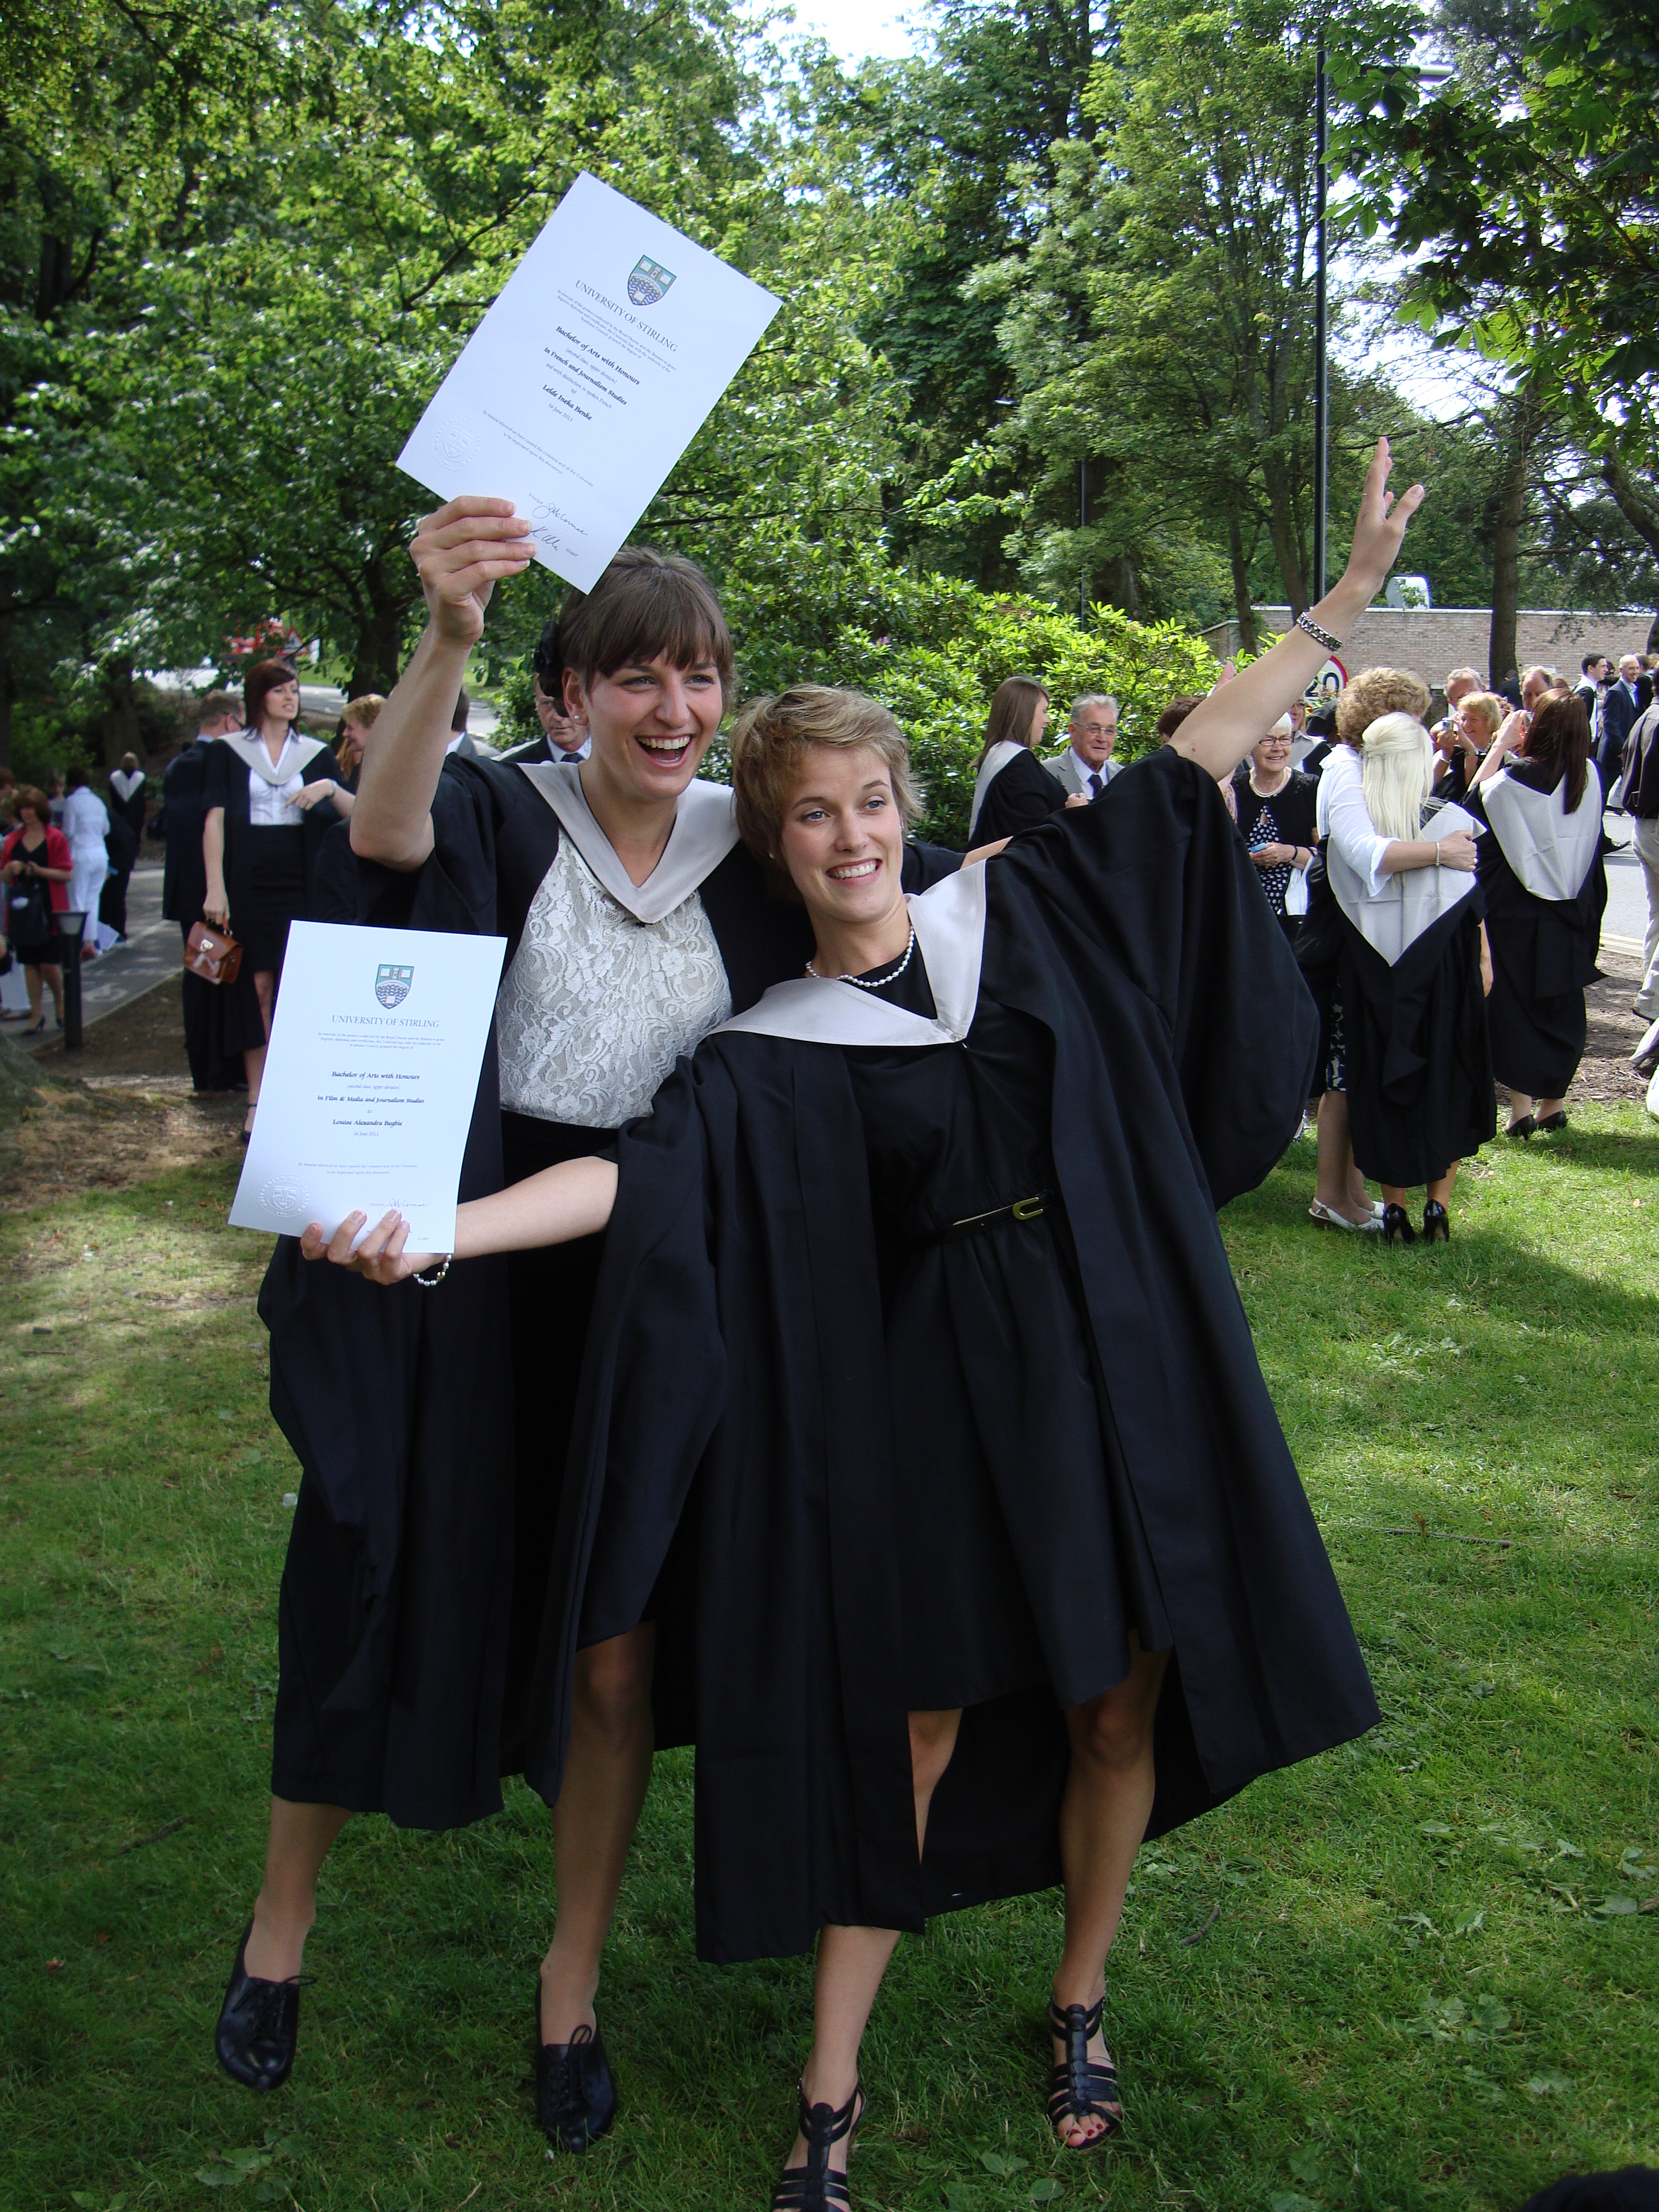 Graduation, Stirling style | Reasons to Love Scotland